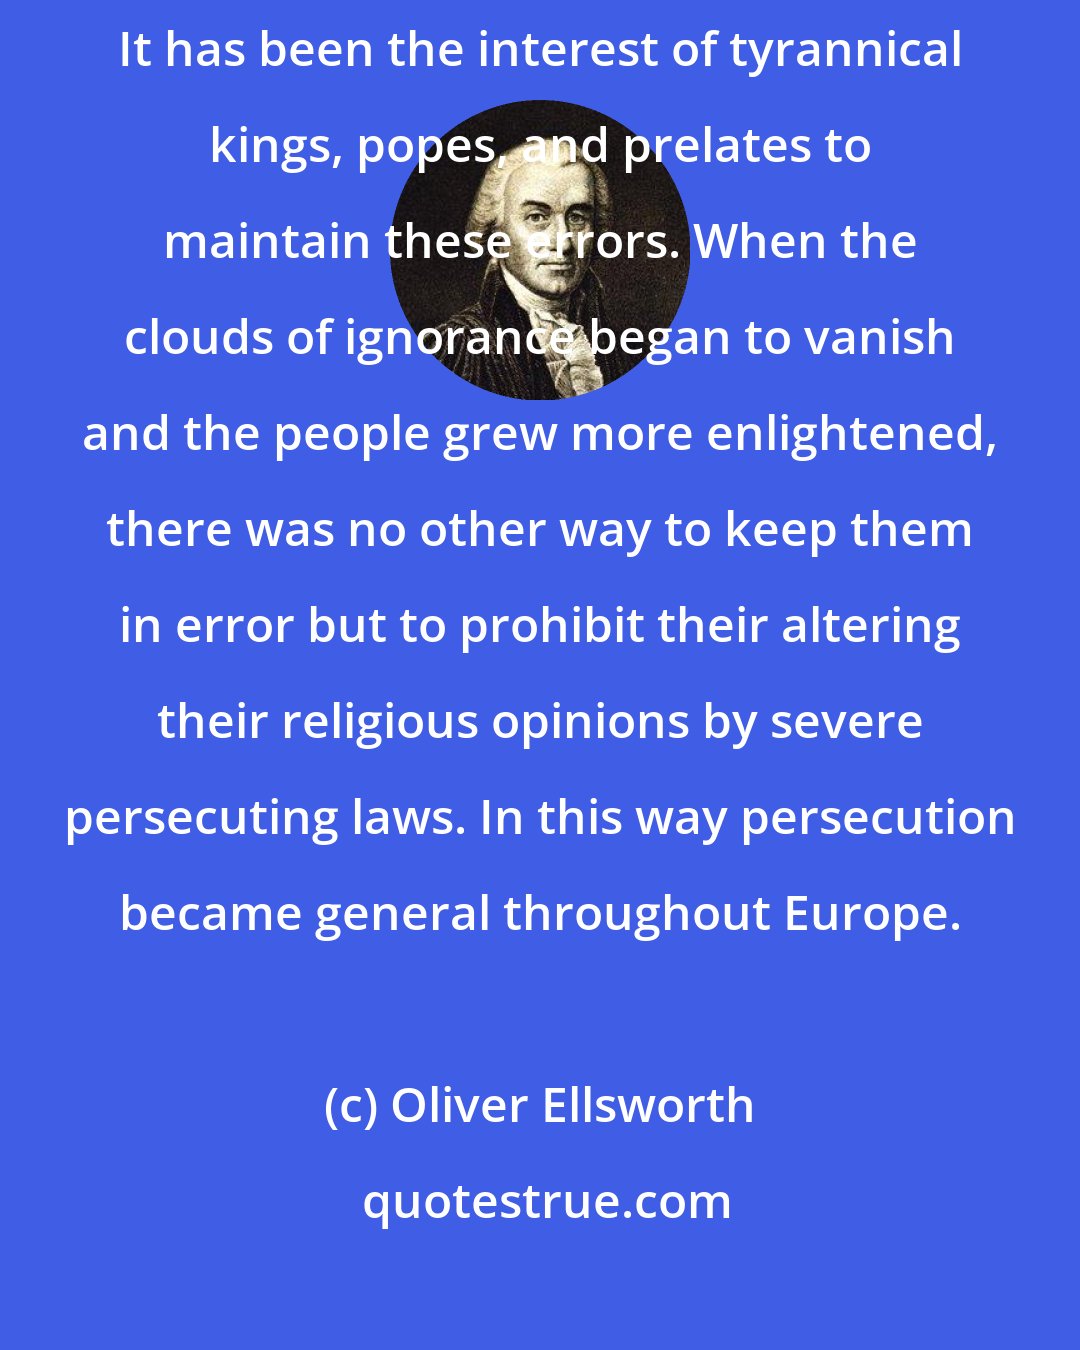 Oliver Ellsworth: Systems of religious error have been adopted in times of ignorance. It has been the interest of tyrannical kings, popes, and prelates to maintain these errors. When the clouds of ignorance began to vanish and the people grew more enlightened, there was no other way to keep them in error but to prohibit their altering their religious opinions by severe persecuting laws. In this way persecution became general throughout Europe.